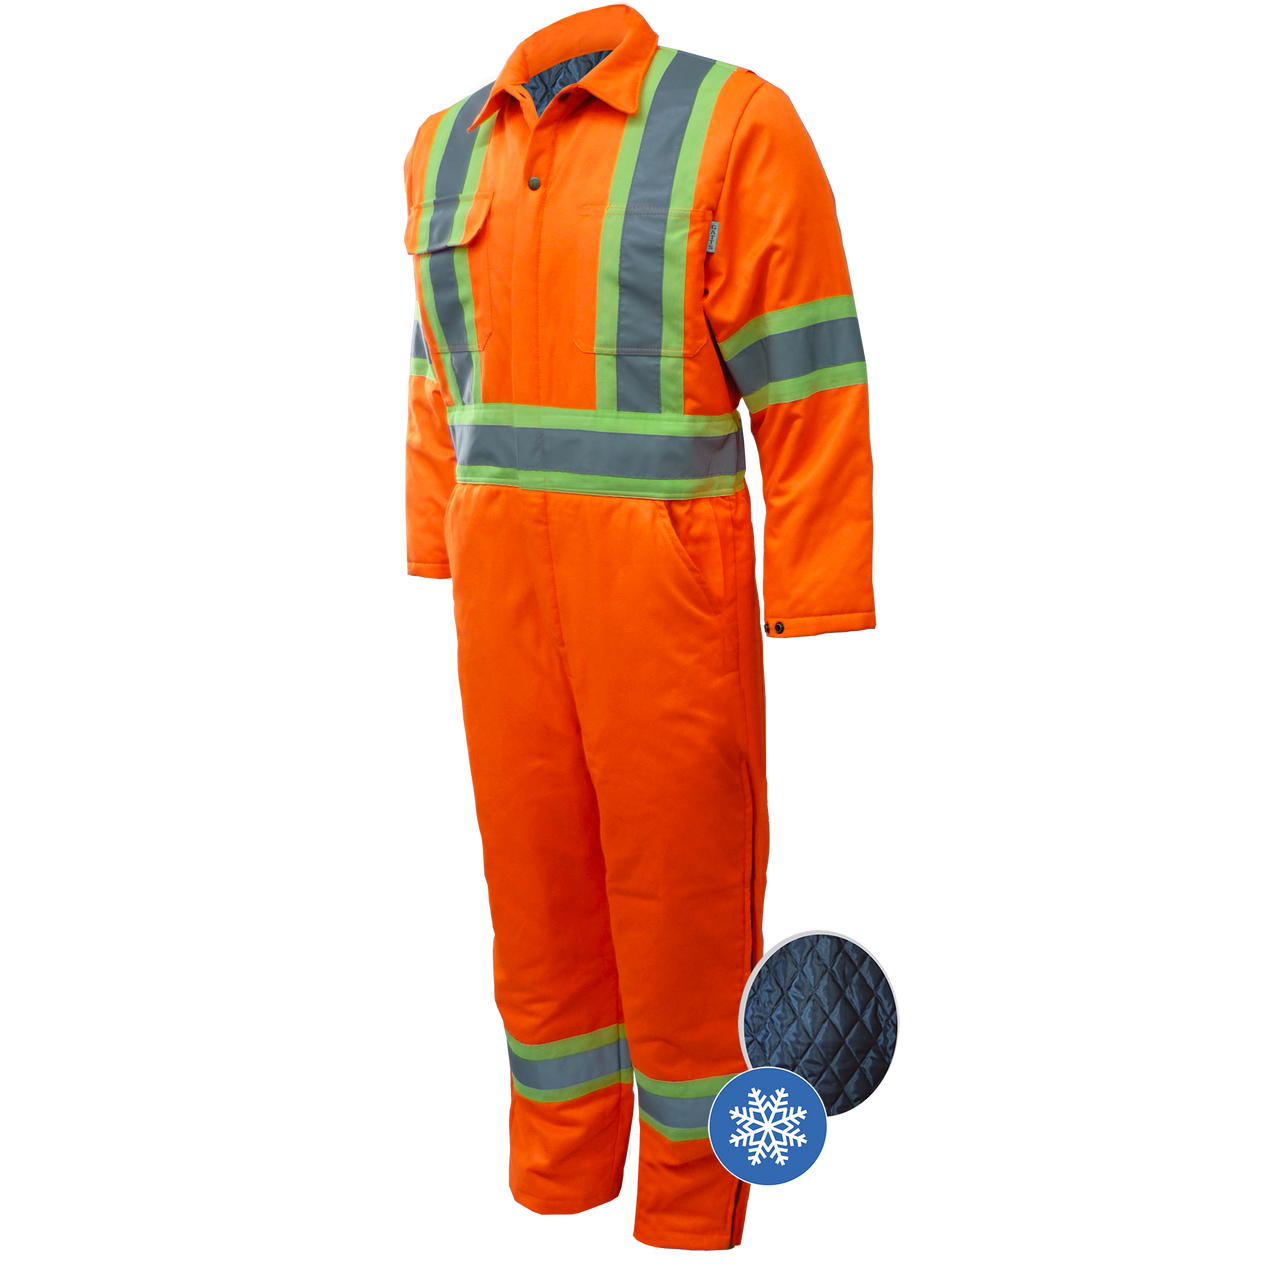 791XD4 - Couvre-tout Doublé||791XD4 - Lined Coverall